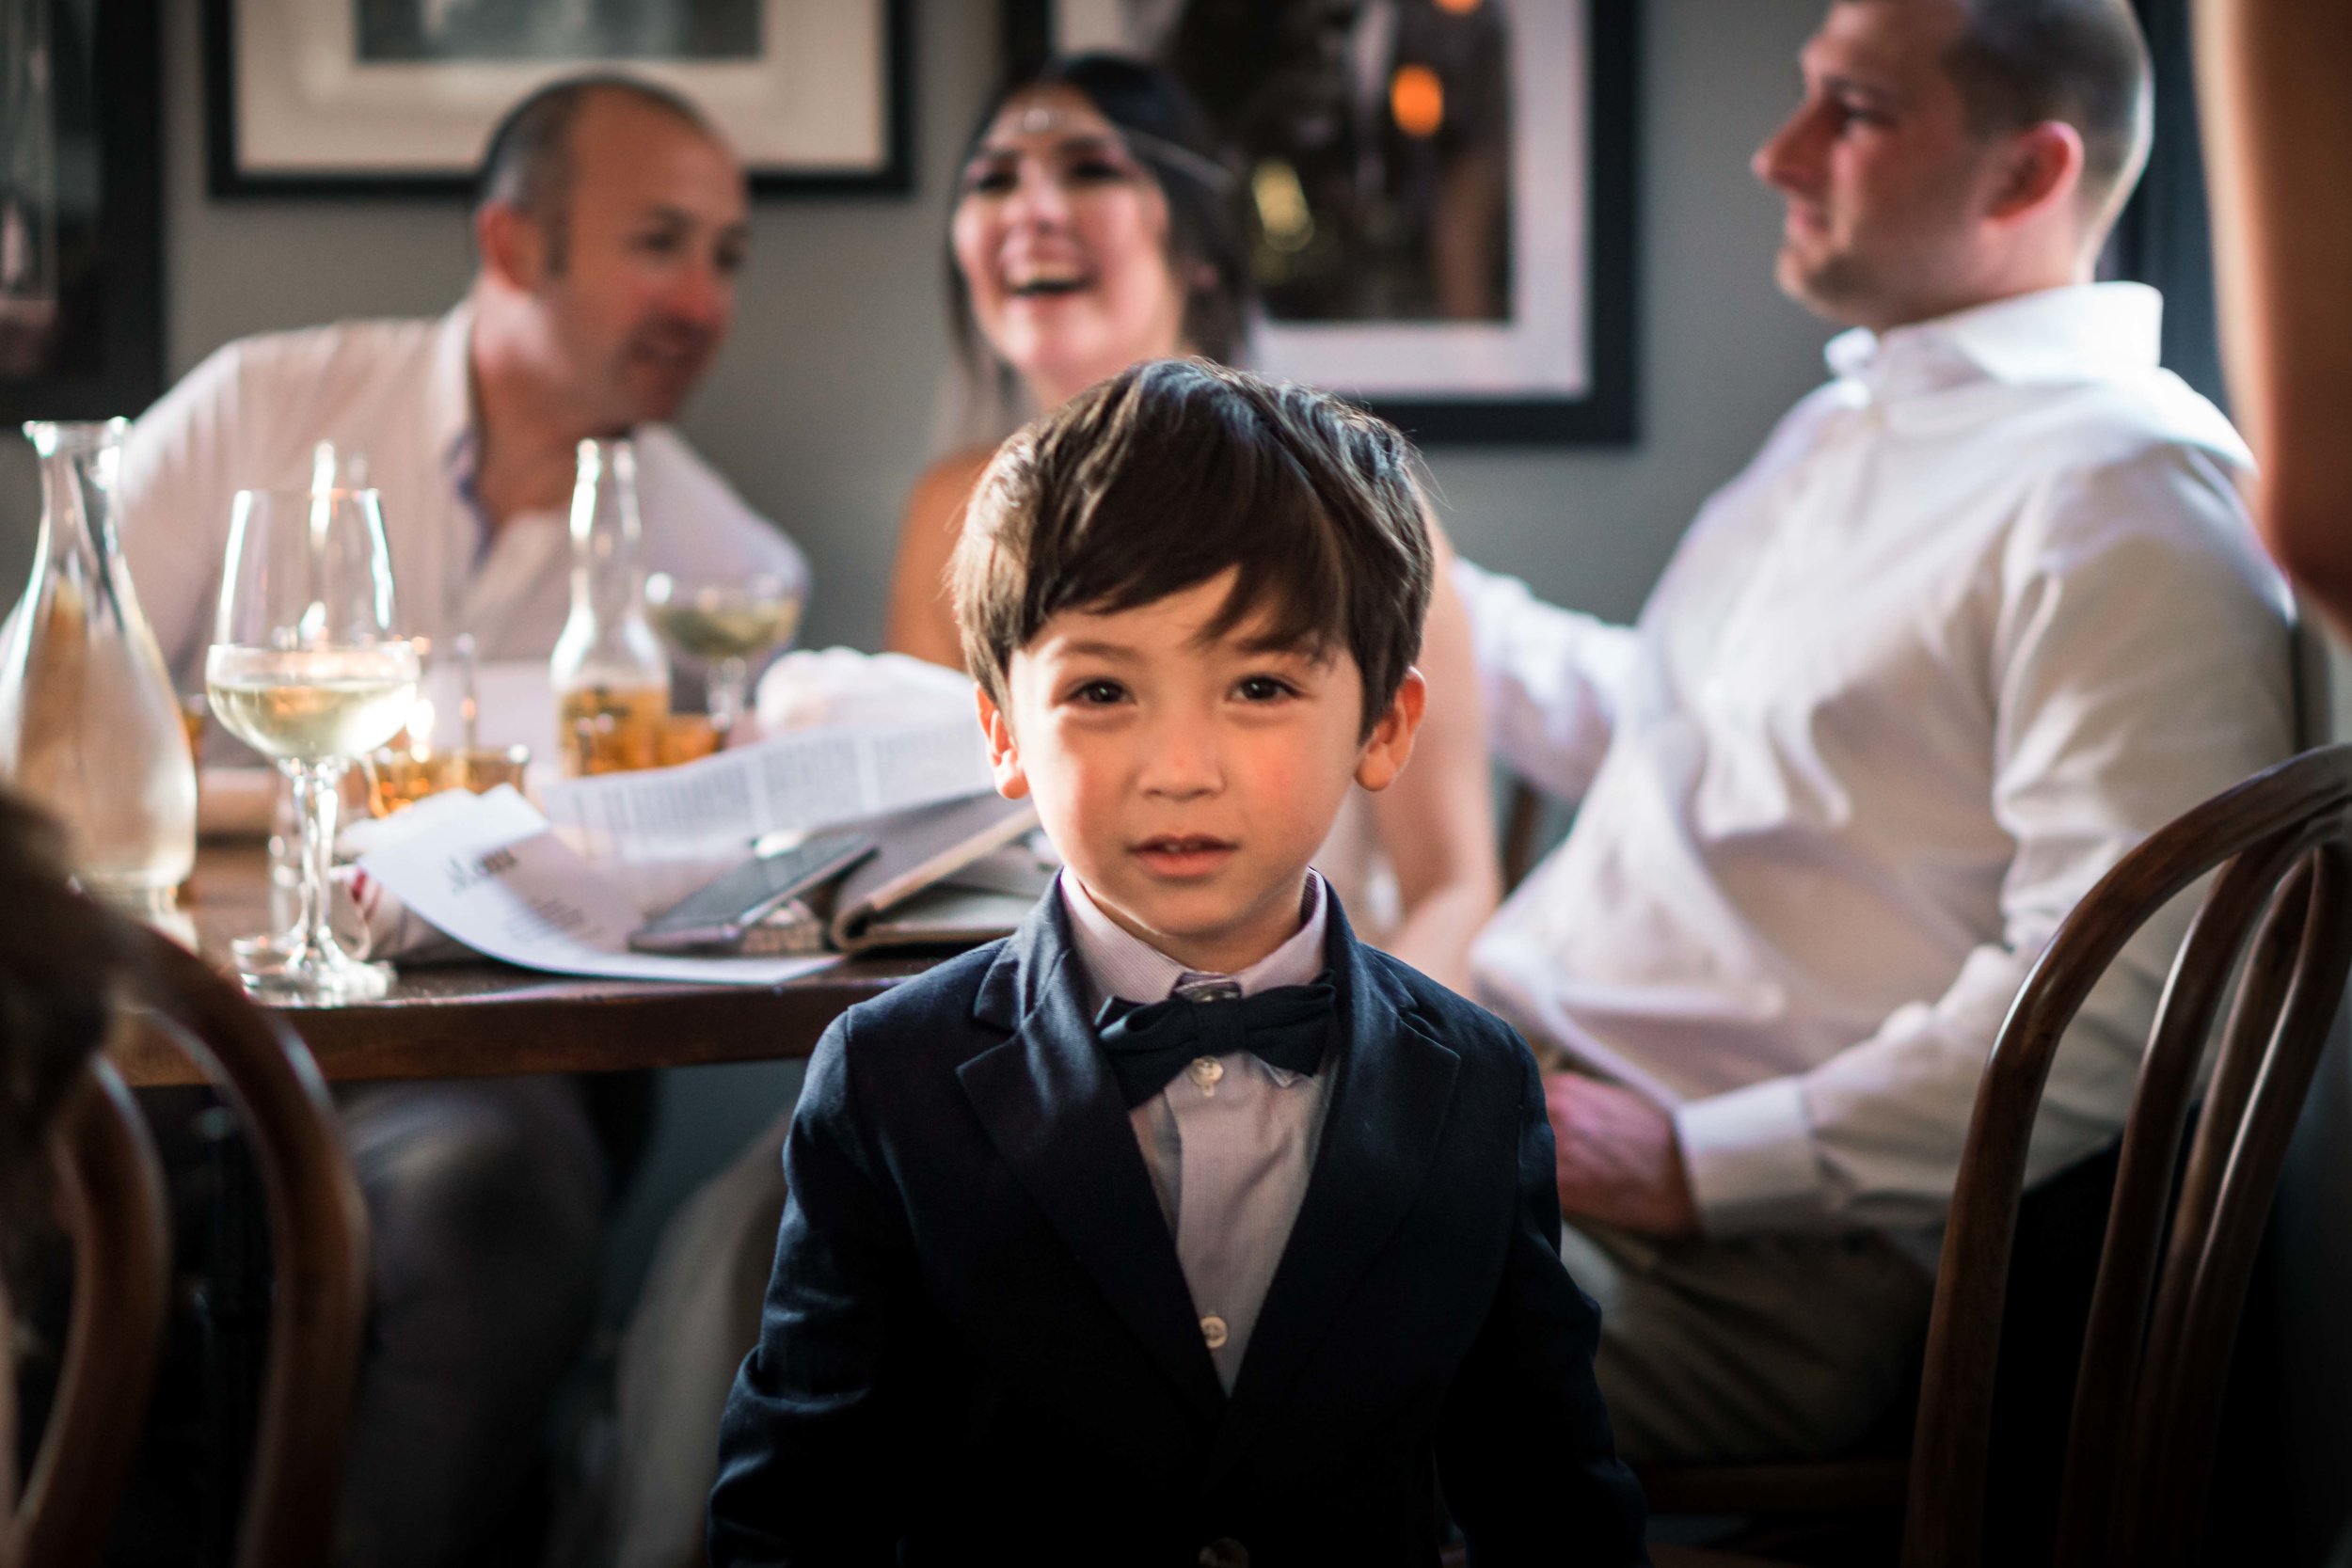 Cute photo of the ring bearer boy looking  At the camera